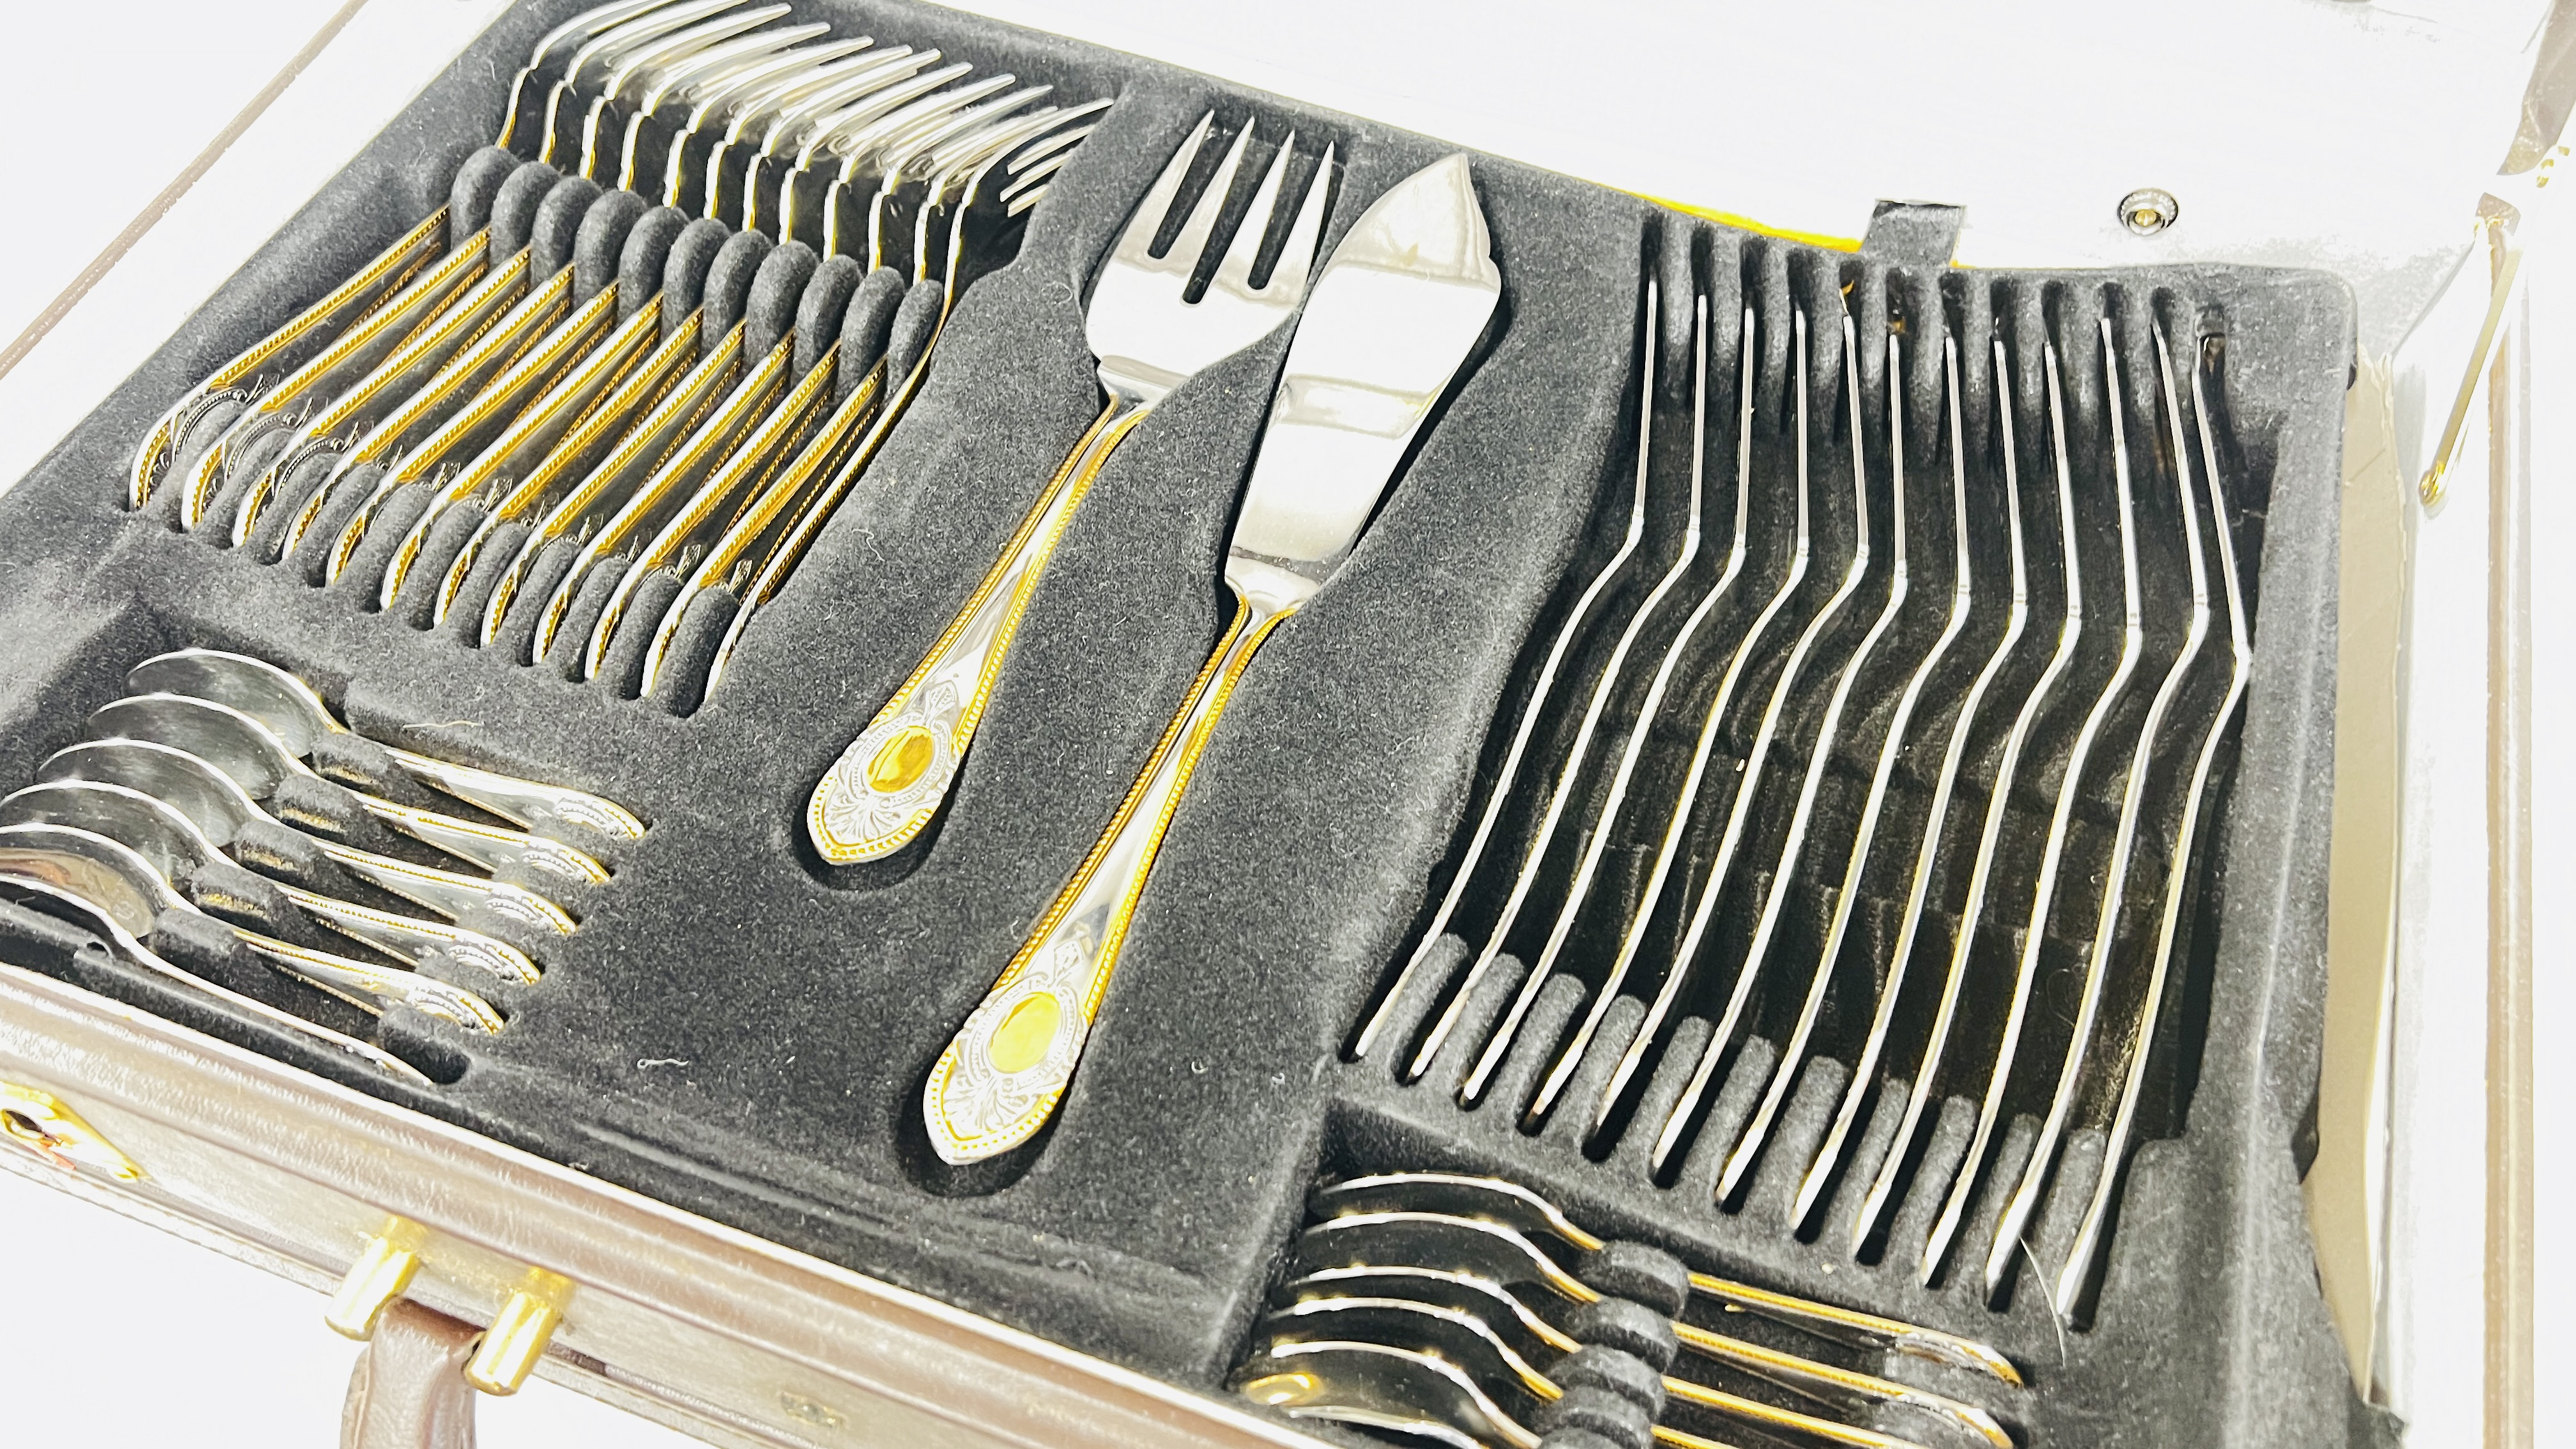 A CASED CANTEEN OF SBS SOLINGEN CUTLERY (12 PLACE SETTING). - Image 4 of 8